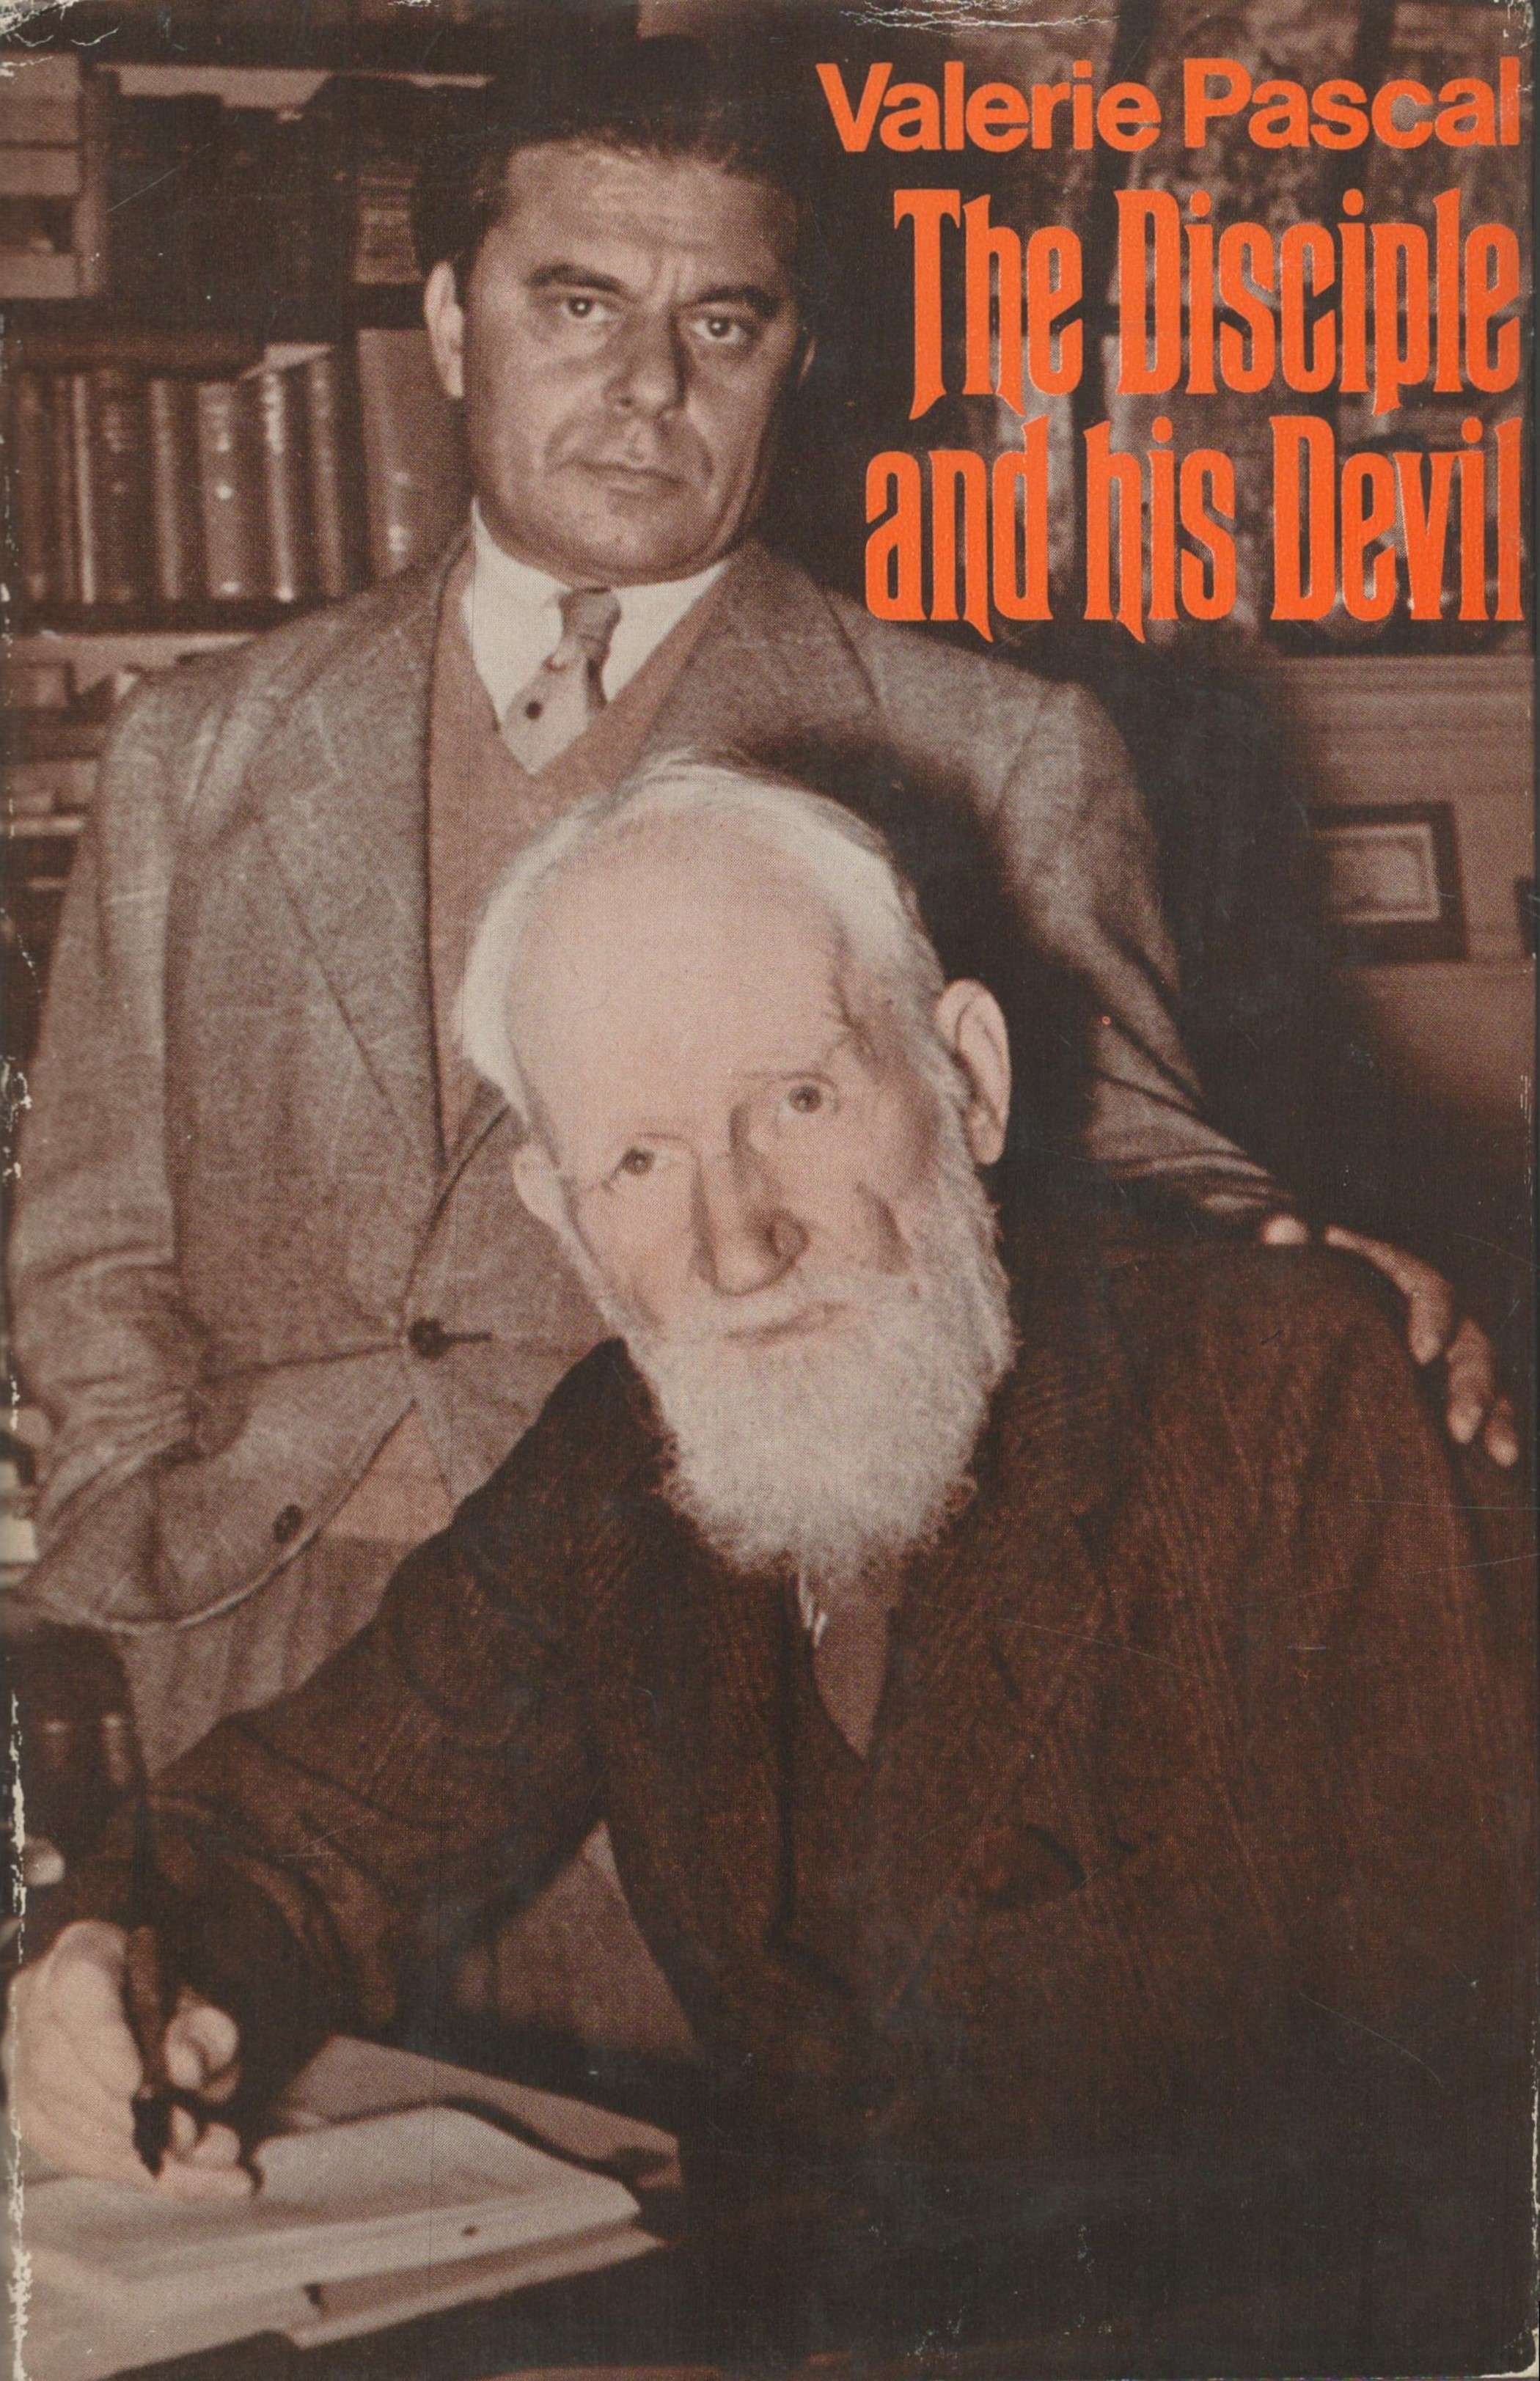 Valerie Pascal The Disciple and His Devil, a biography of Gabriel Pascal by his wife 1971.